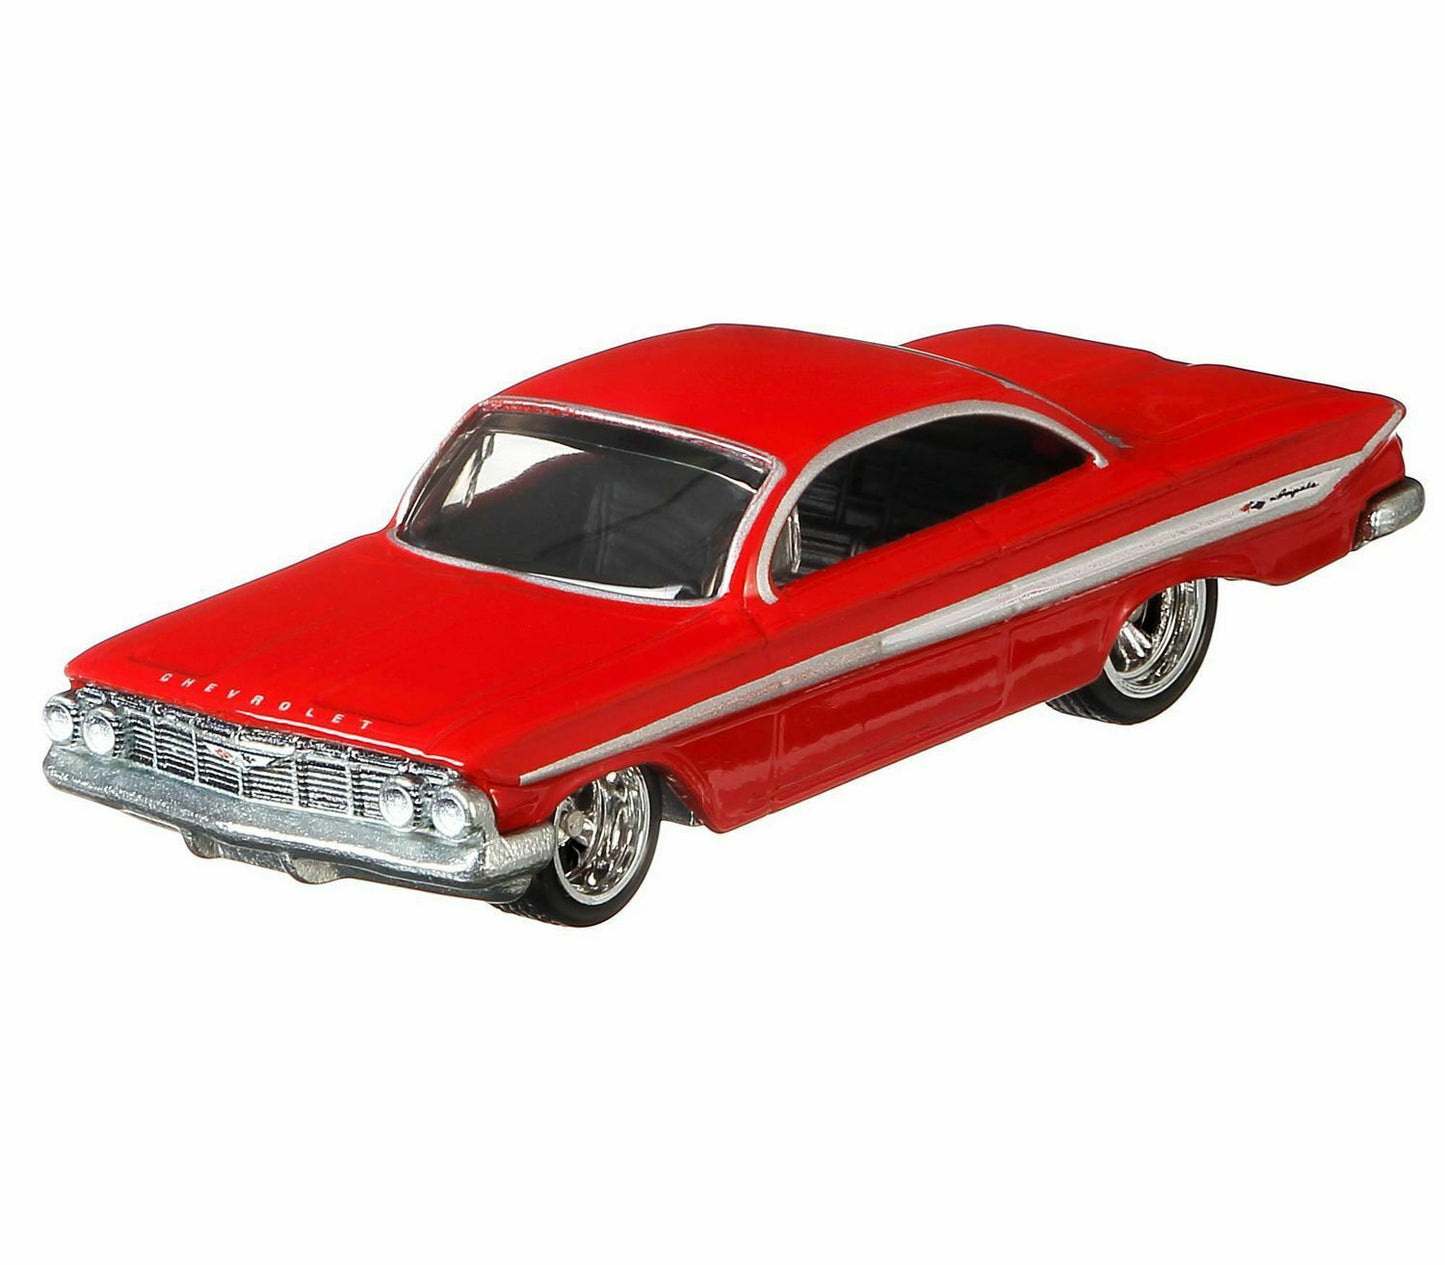 Hot Wheels Fast & Furious Motor City Muscle 61 Impala Red 1:64